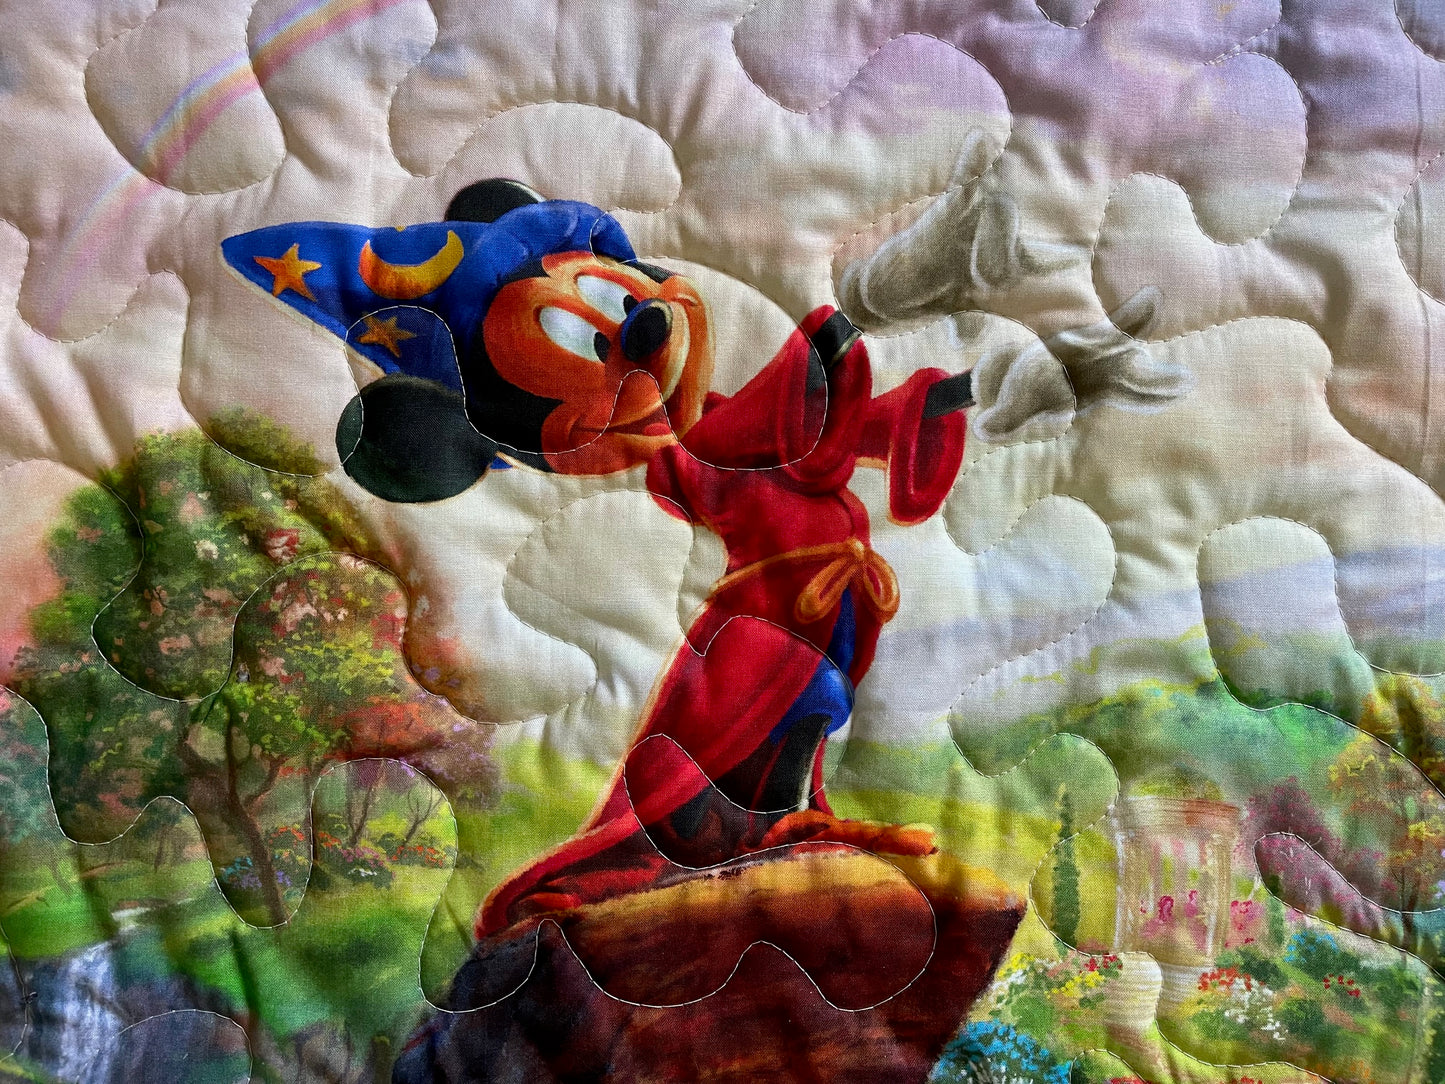 DISNEY FANTASMIC SORCERER MICKEY MOUSE Inspired Quilted Blanket 36"x44" Digital Printed Fabric